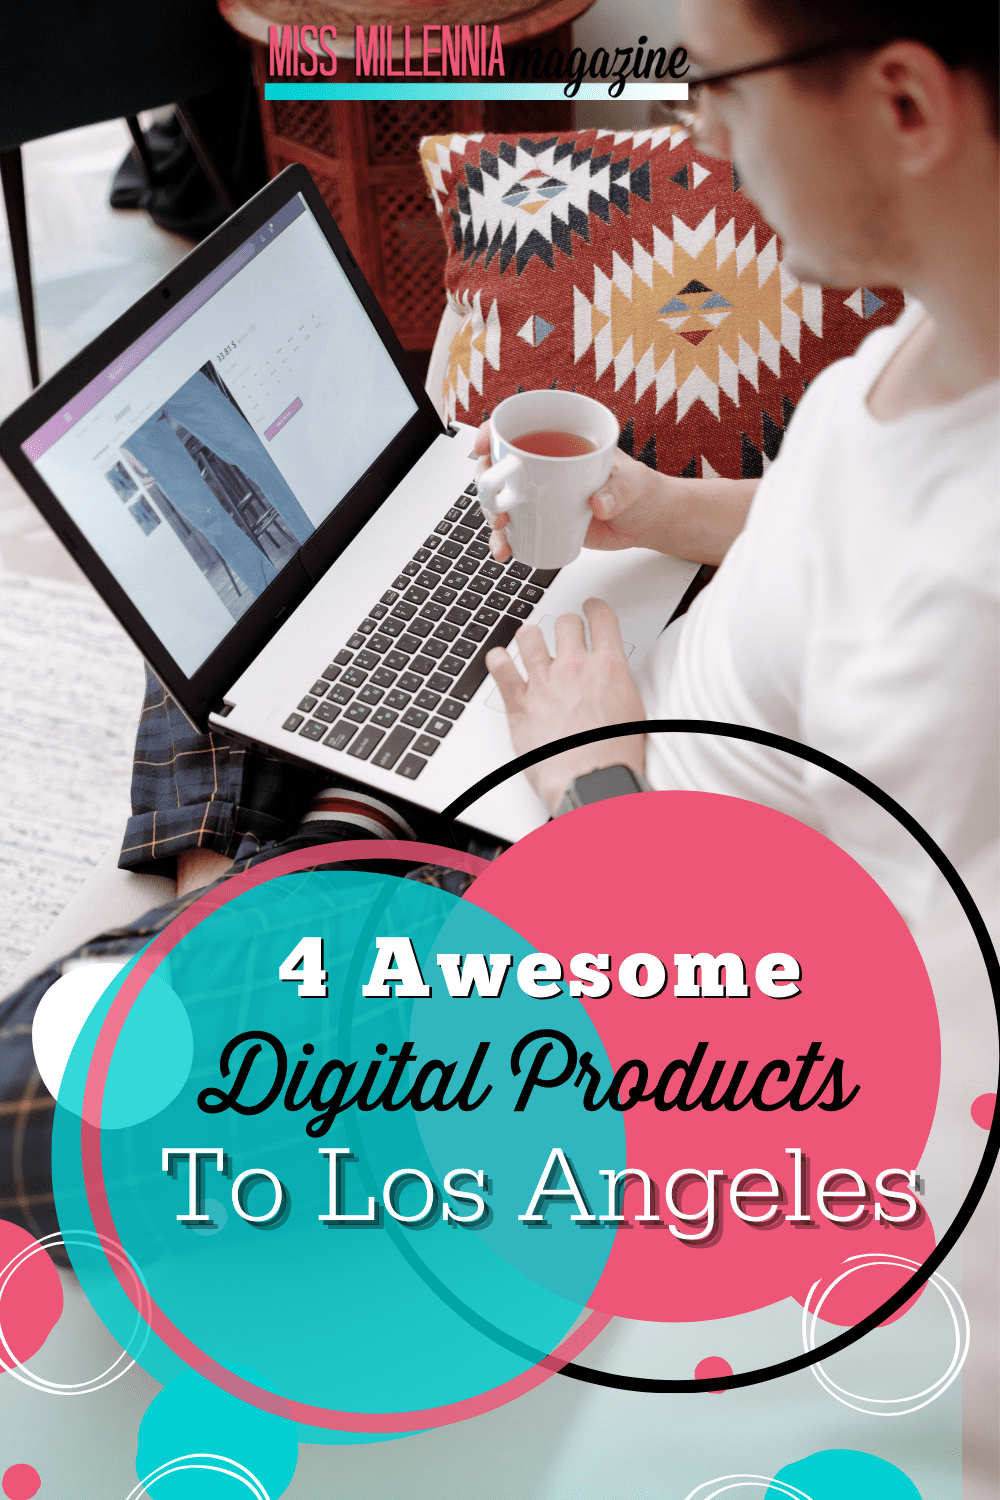 4 Awesome Digital Products That Can Make You Money